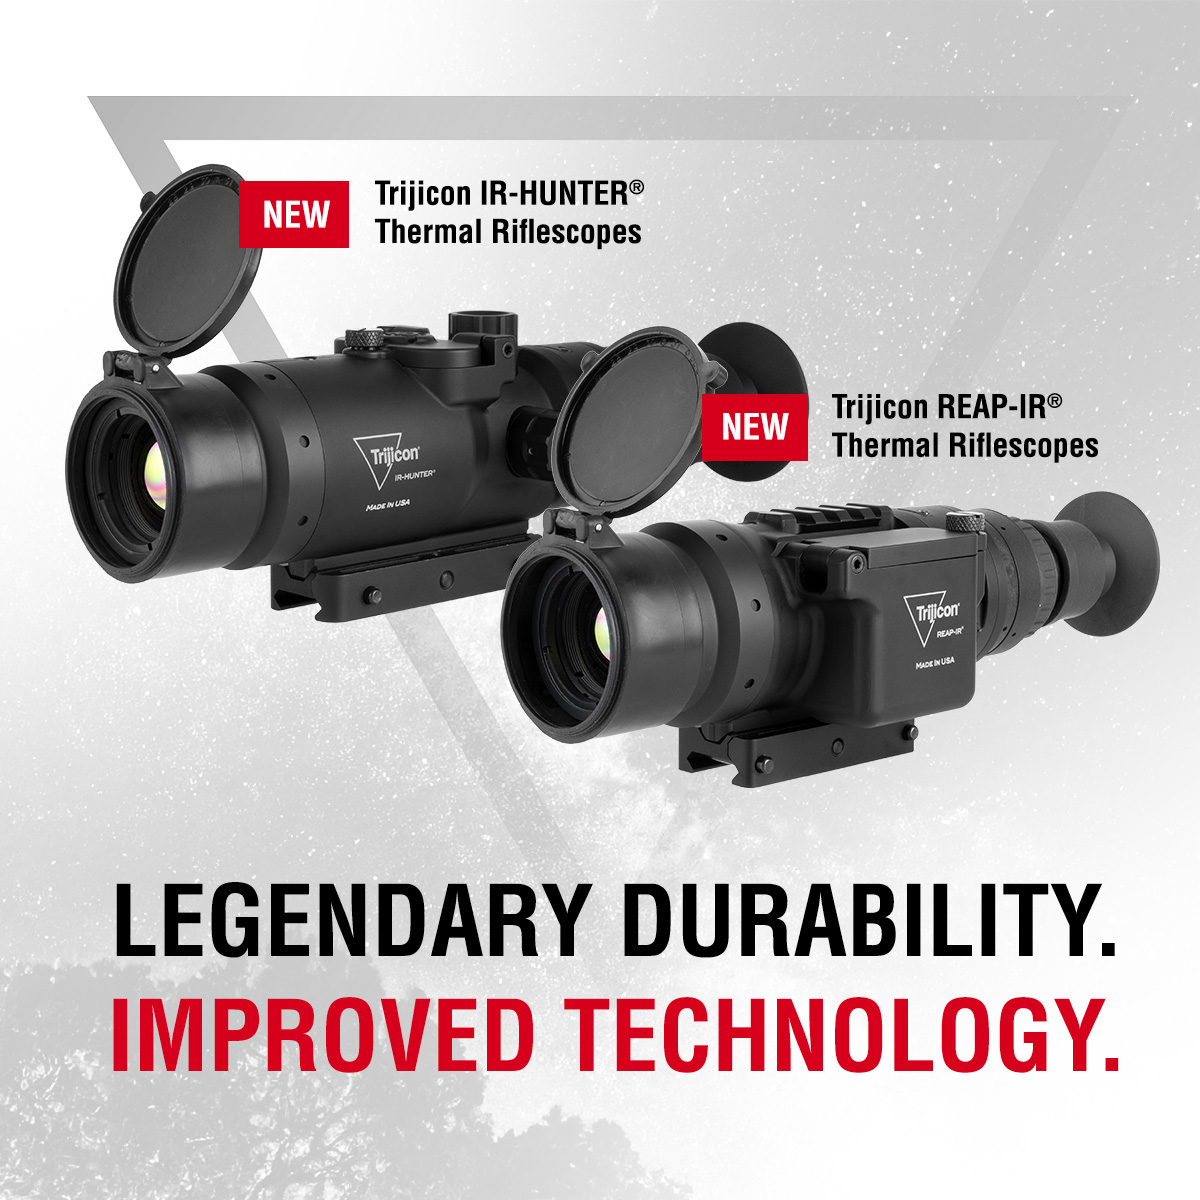 you’re going to invest in a thermal riflescope, you deserve proven innovation that’s engineered to last (and built in the USA). And now, we’ve improved our popular REAP-IR and IR-HUNTER thermals. They come with new on-board DVR recording capabilities, and improved image quality